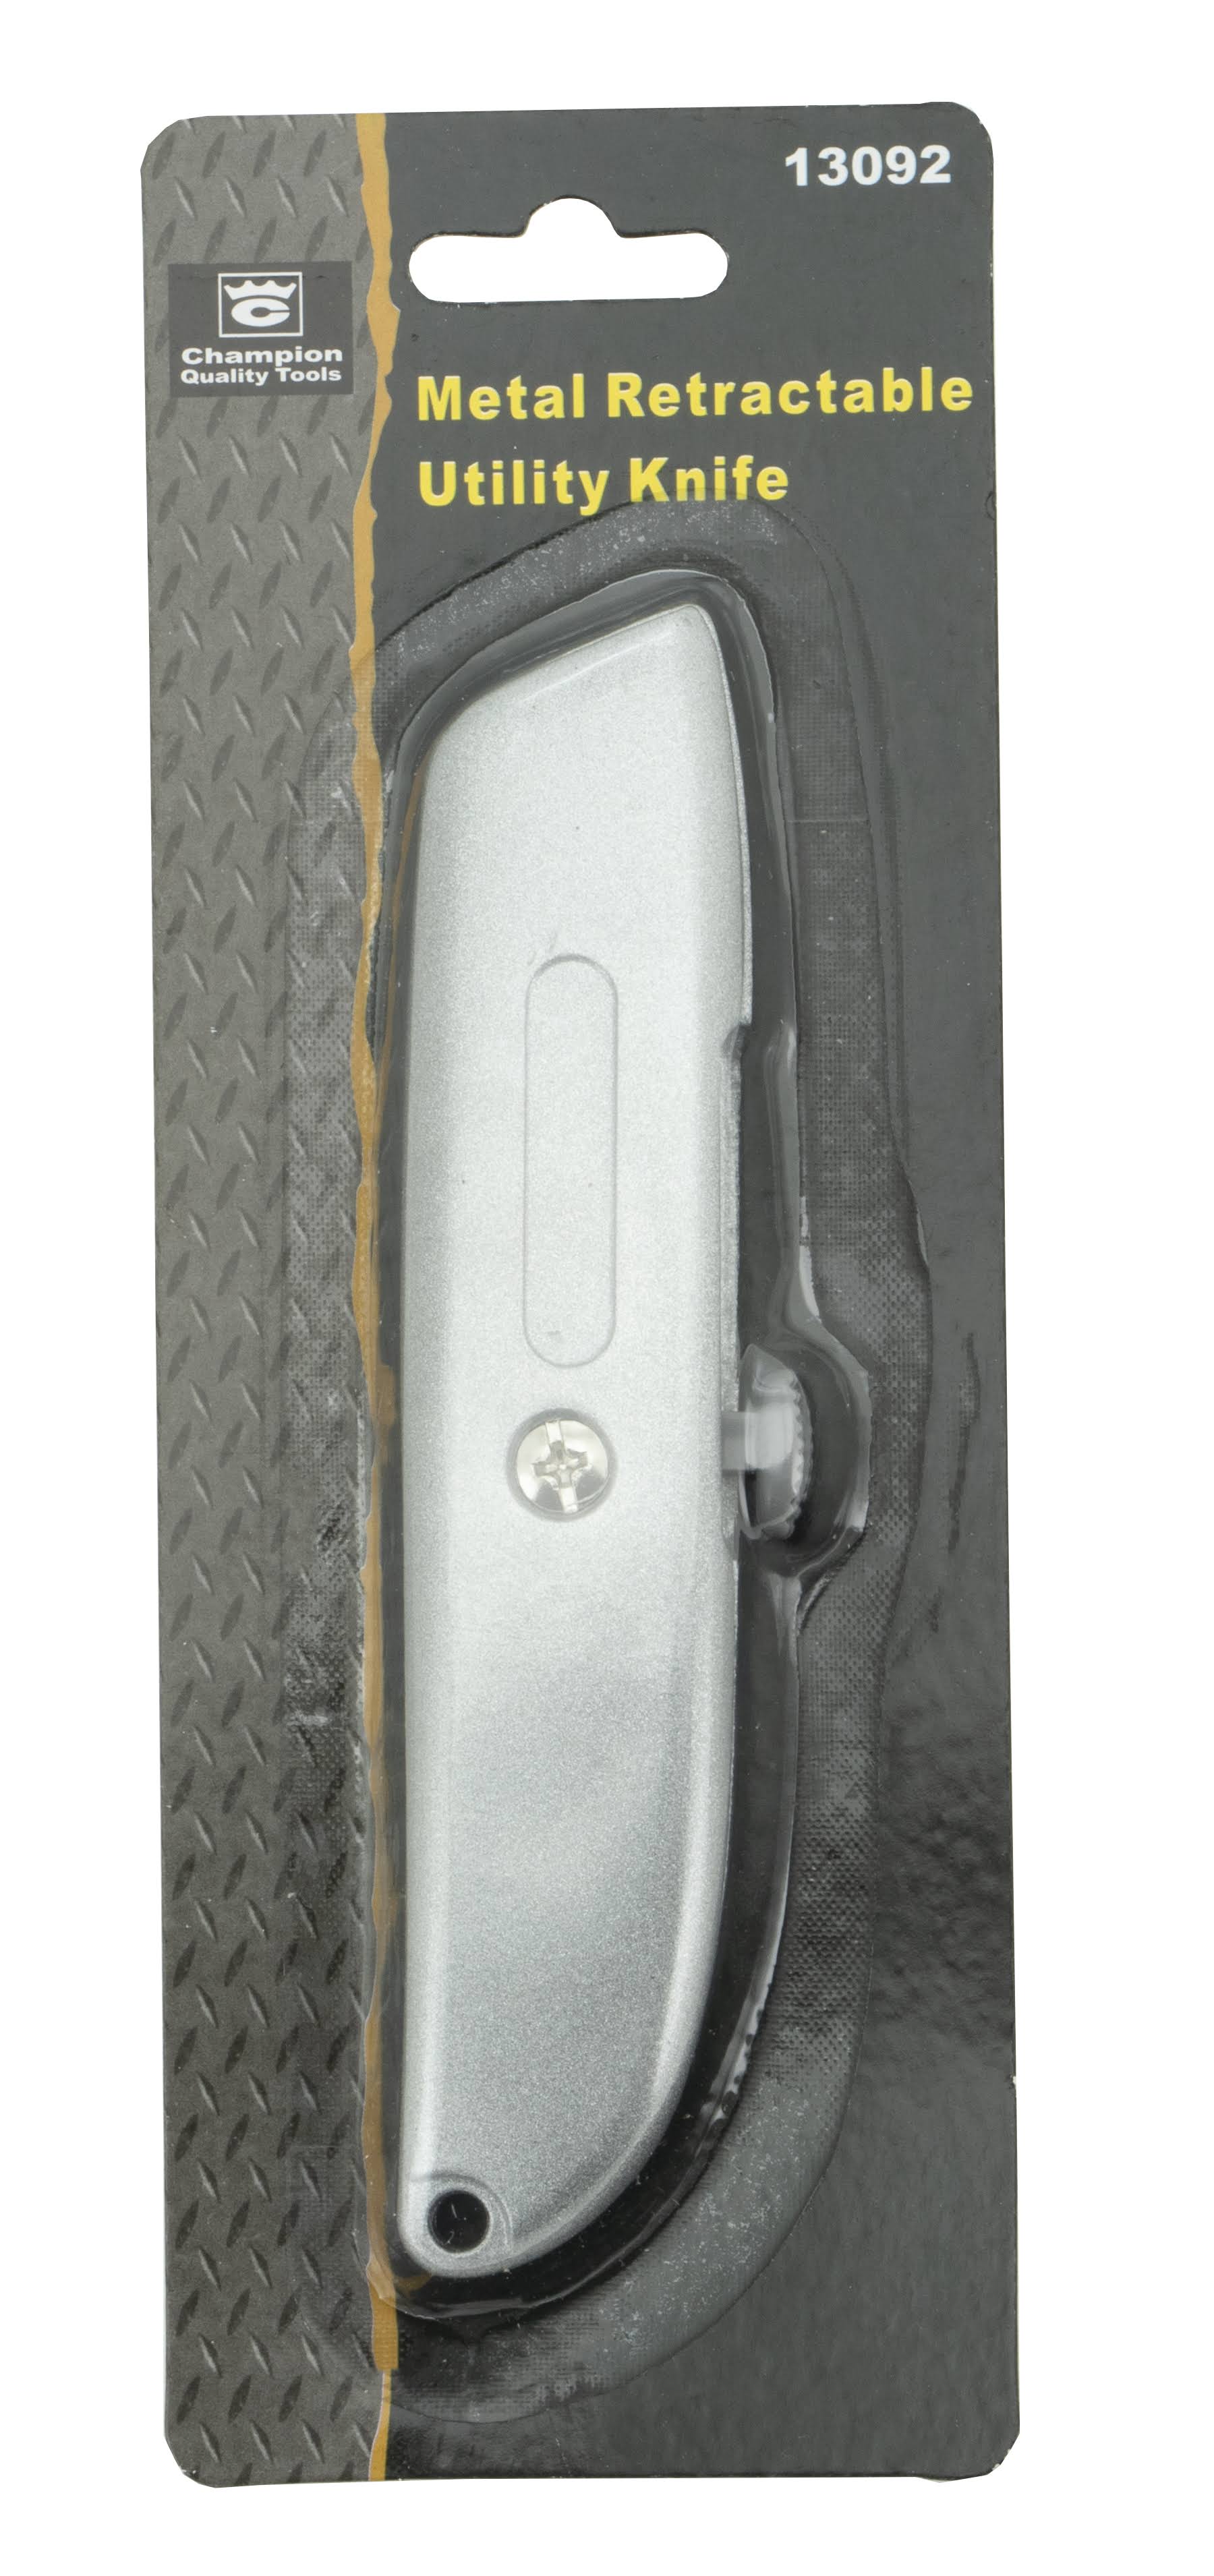 Utility Knife, Metal Body, Retractable